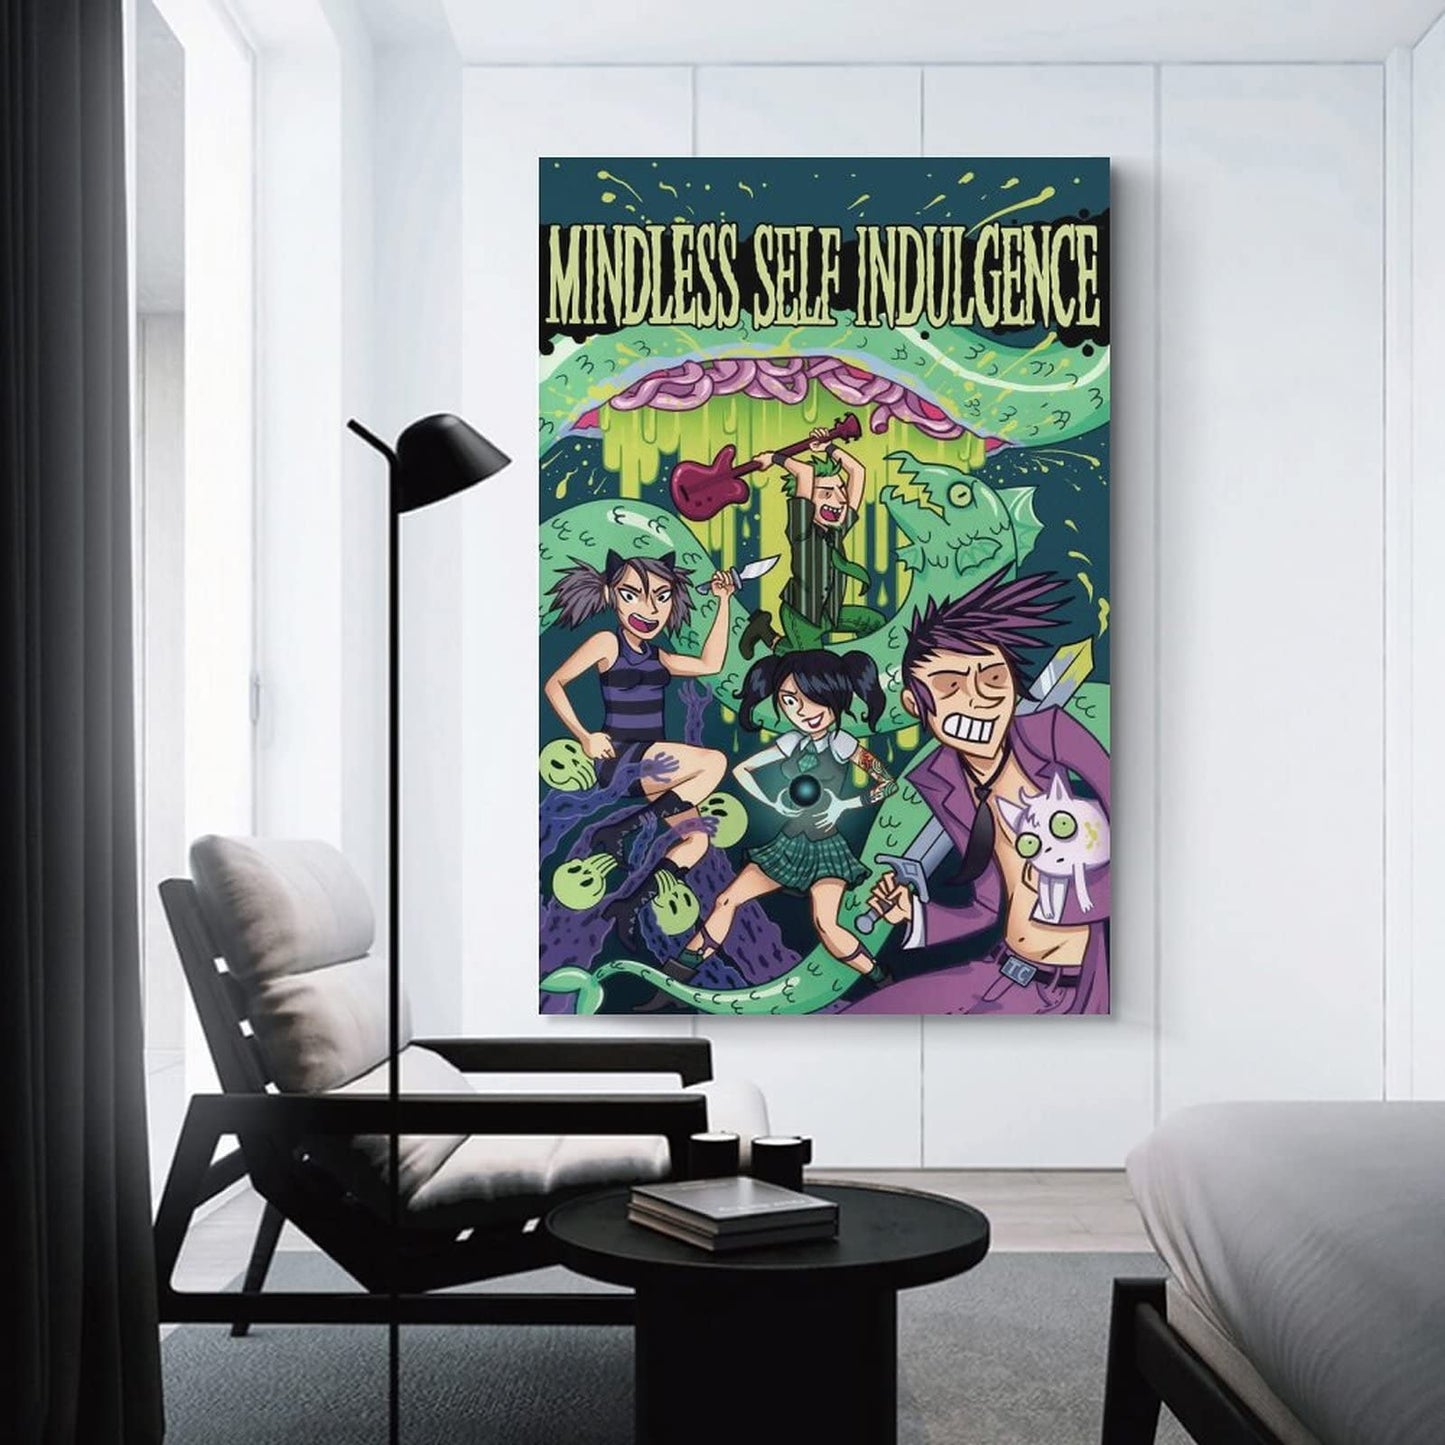 HOWhite Mindless Self Indulgence Punk Band Poste Canvas Art Poster And Wall Art Picture Print Modern Family Bedroom Decor Posters 08x12inch(20x30cm)